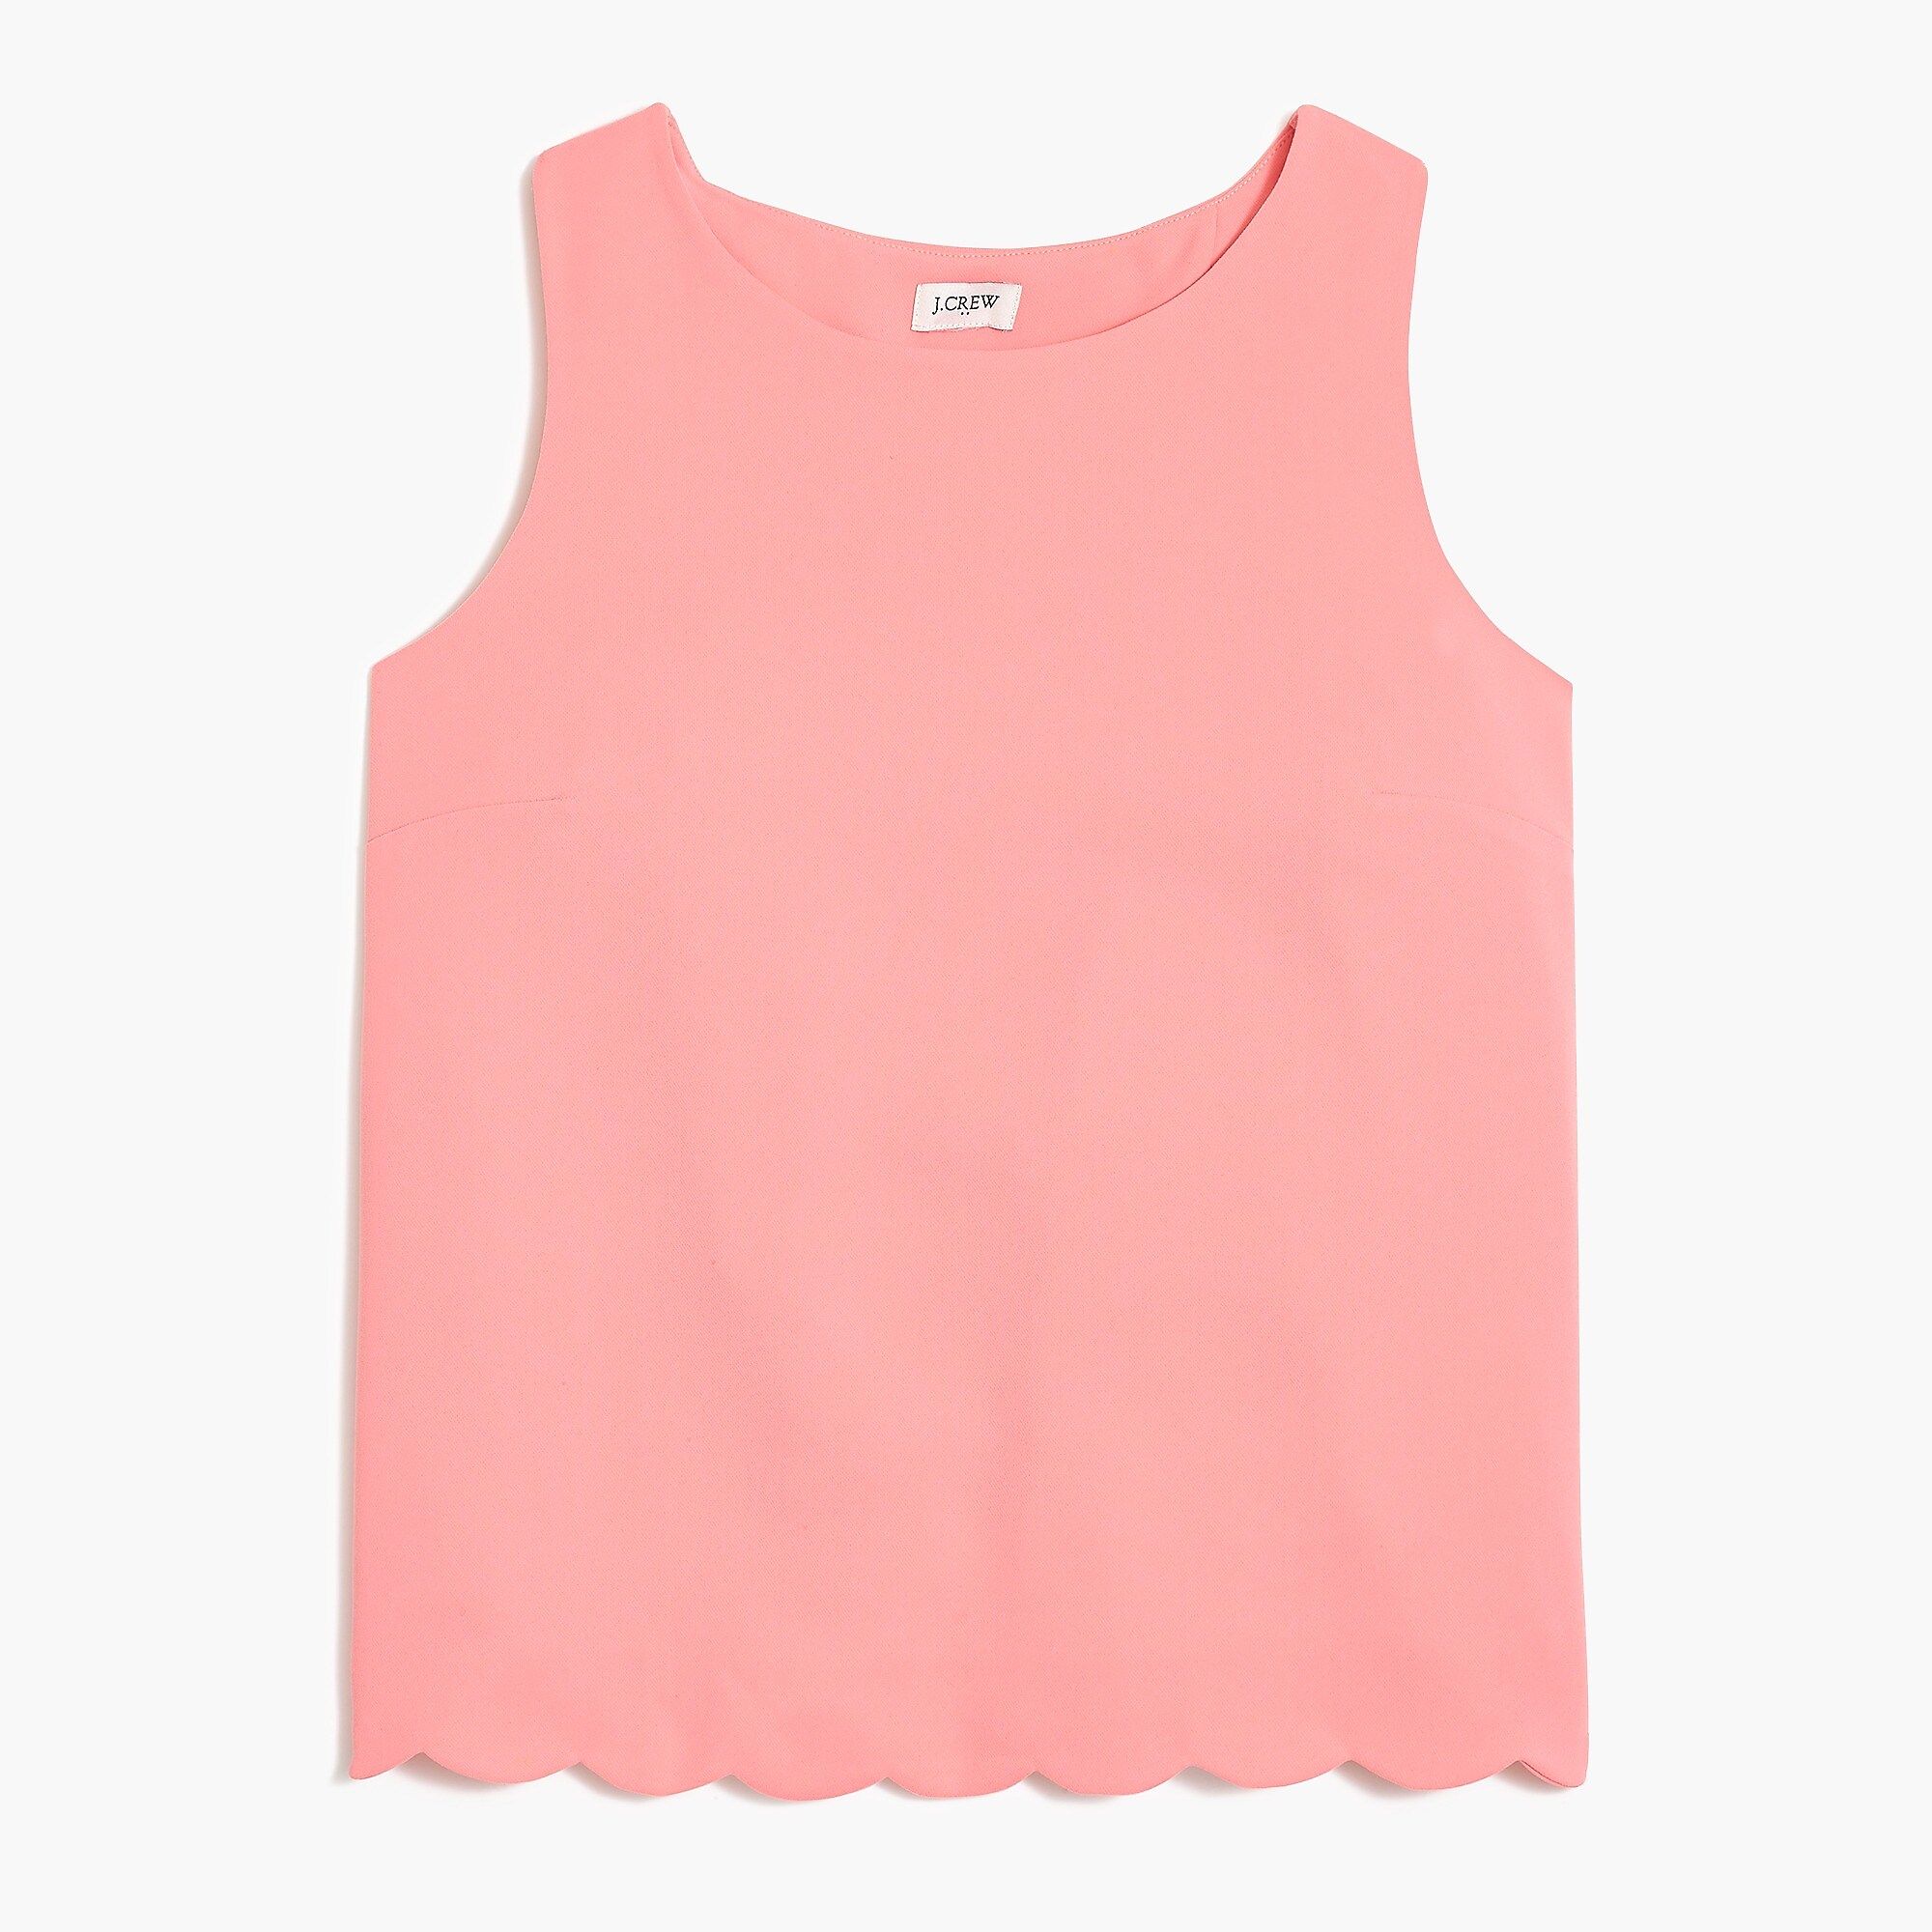 Scalloped-hem top with overlapped back | J.Crew Factory